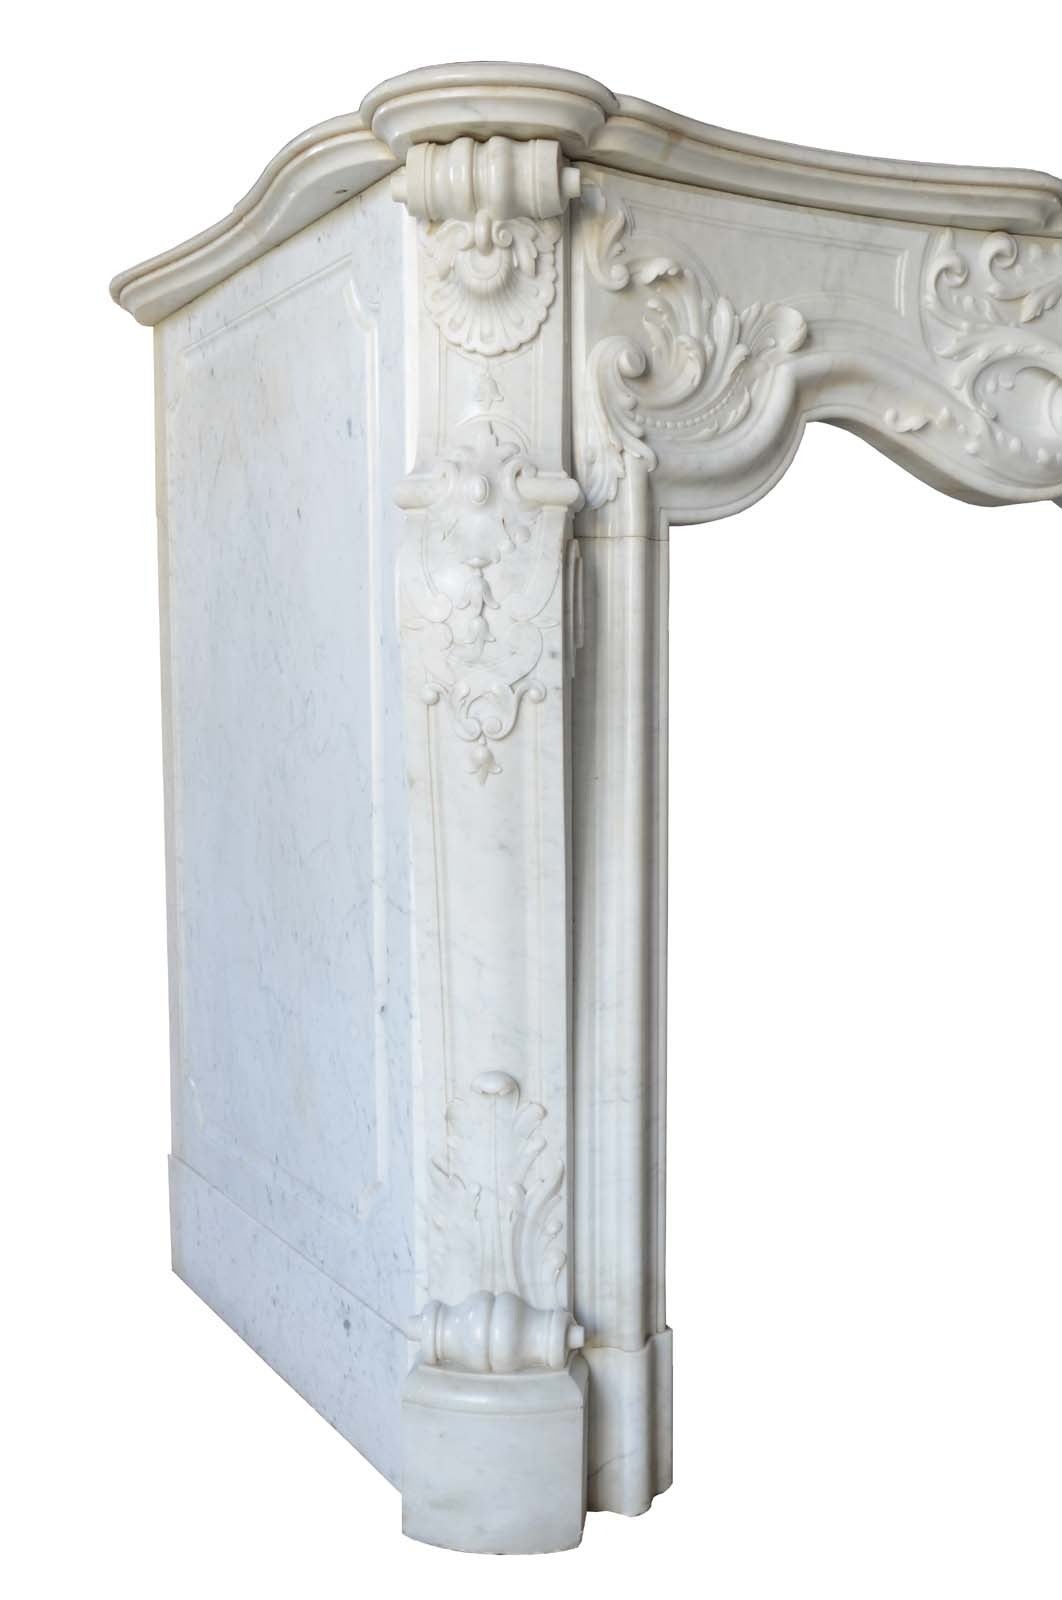 Rare French Louis XV style white marble fireplace dated 19th century. Opening measures: 35 x 42 in.